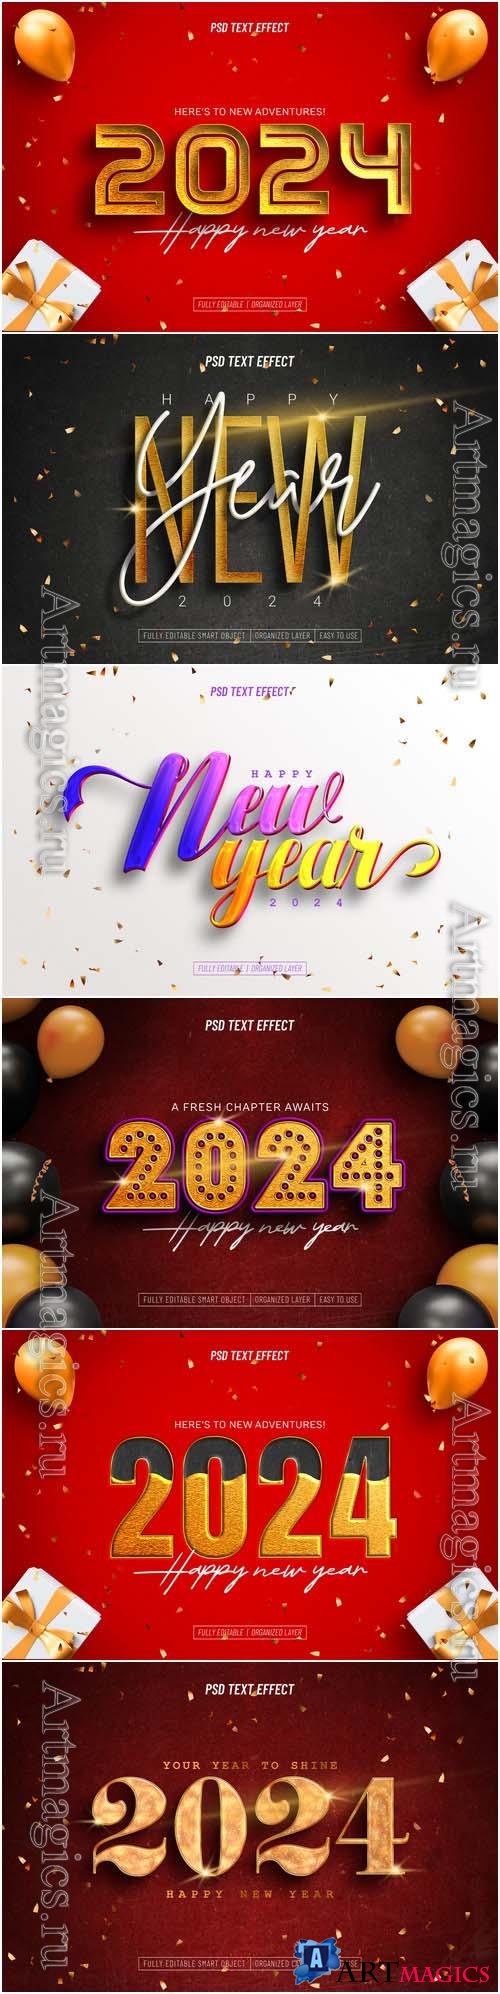 2024 Happy new year text effect vol 2